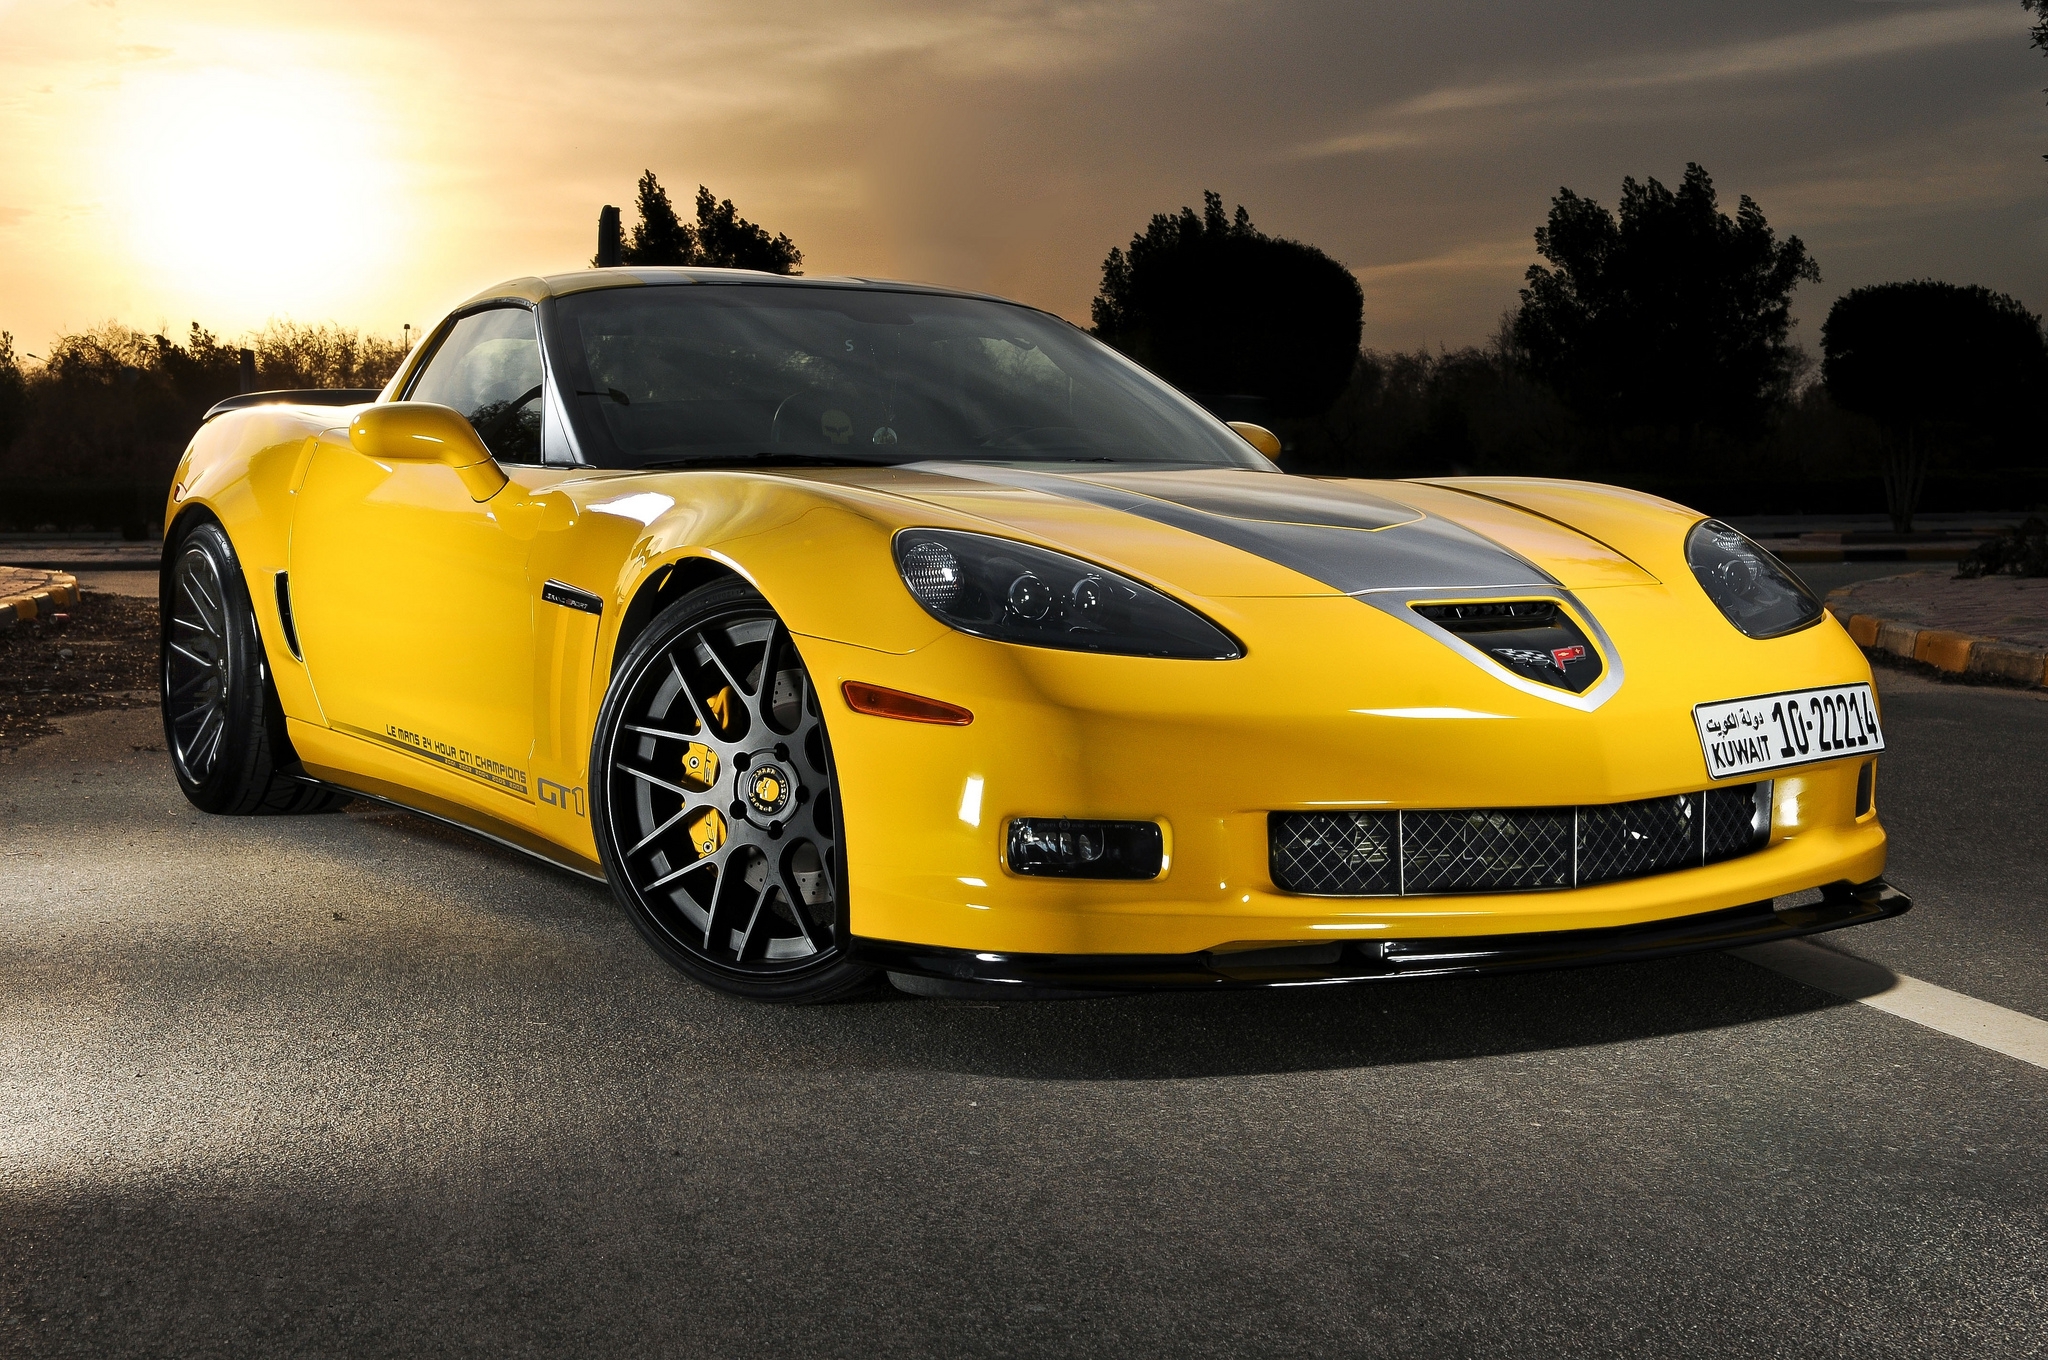 101902 download wallpaper chevrolet, cars, yellow, front view, corvette, c6 screensavers and pictures for free